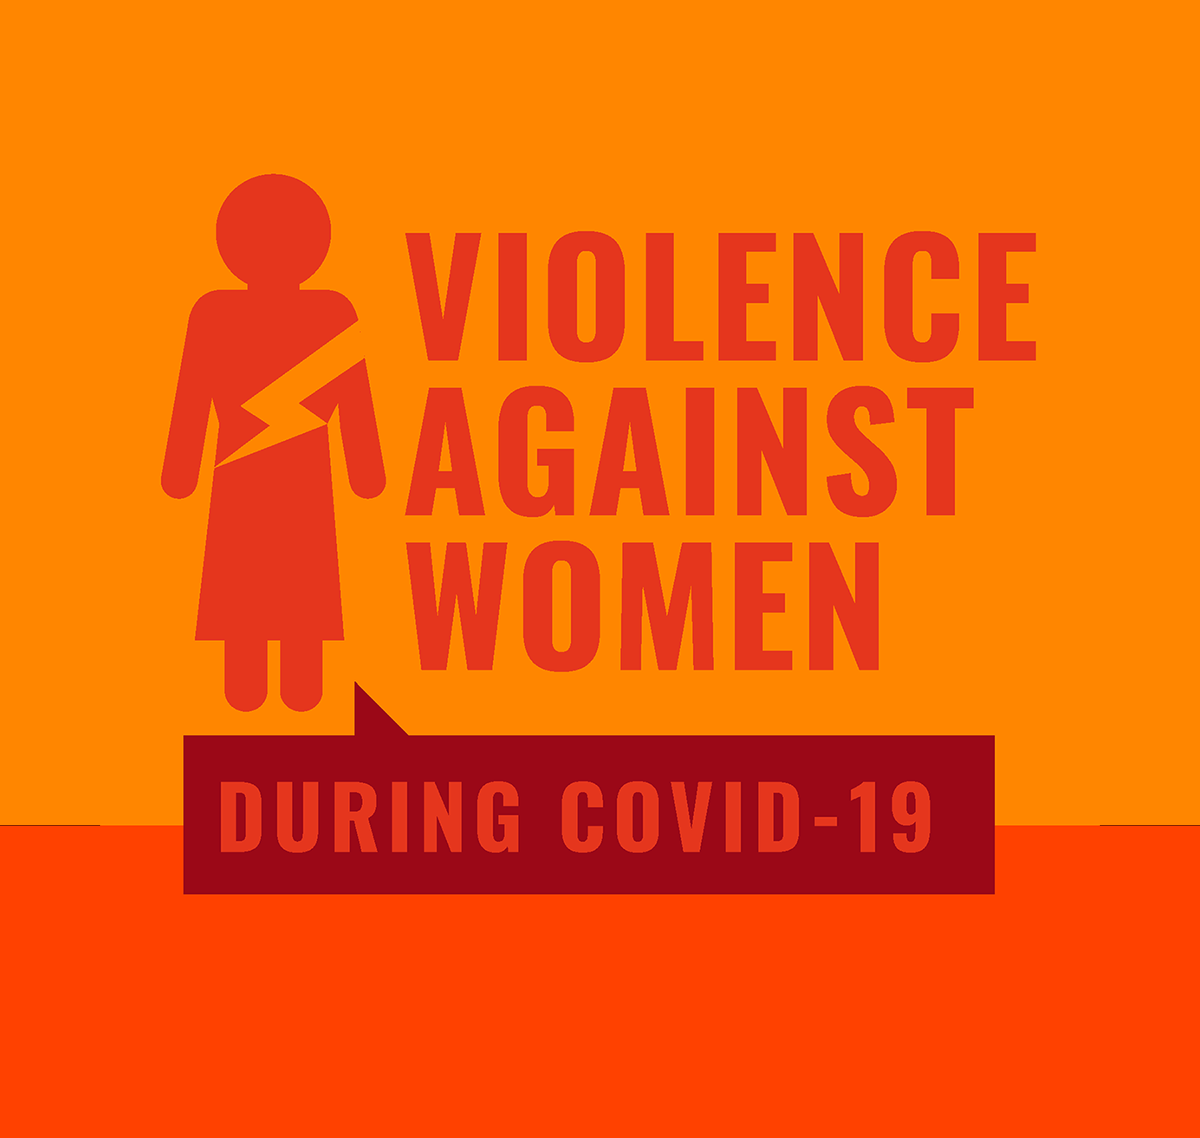 data on violence against women during COVID-19 